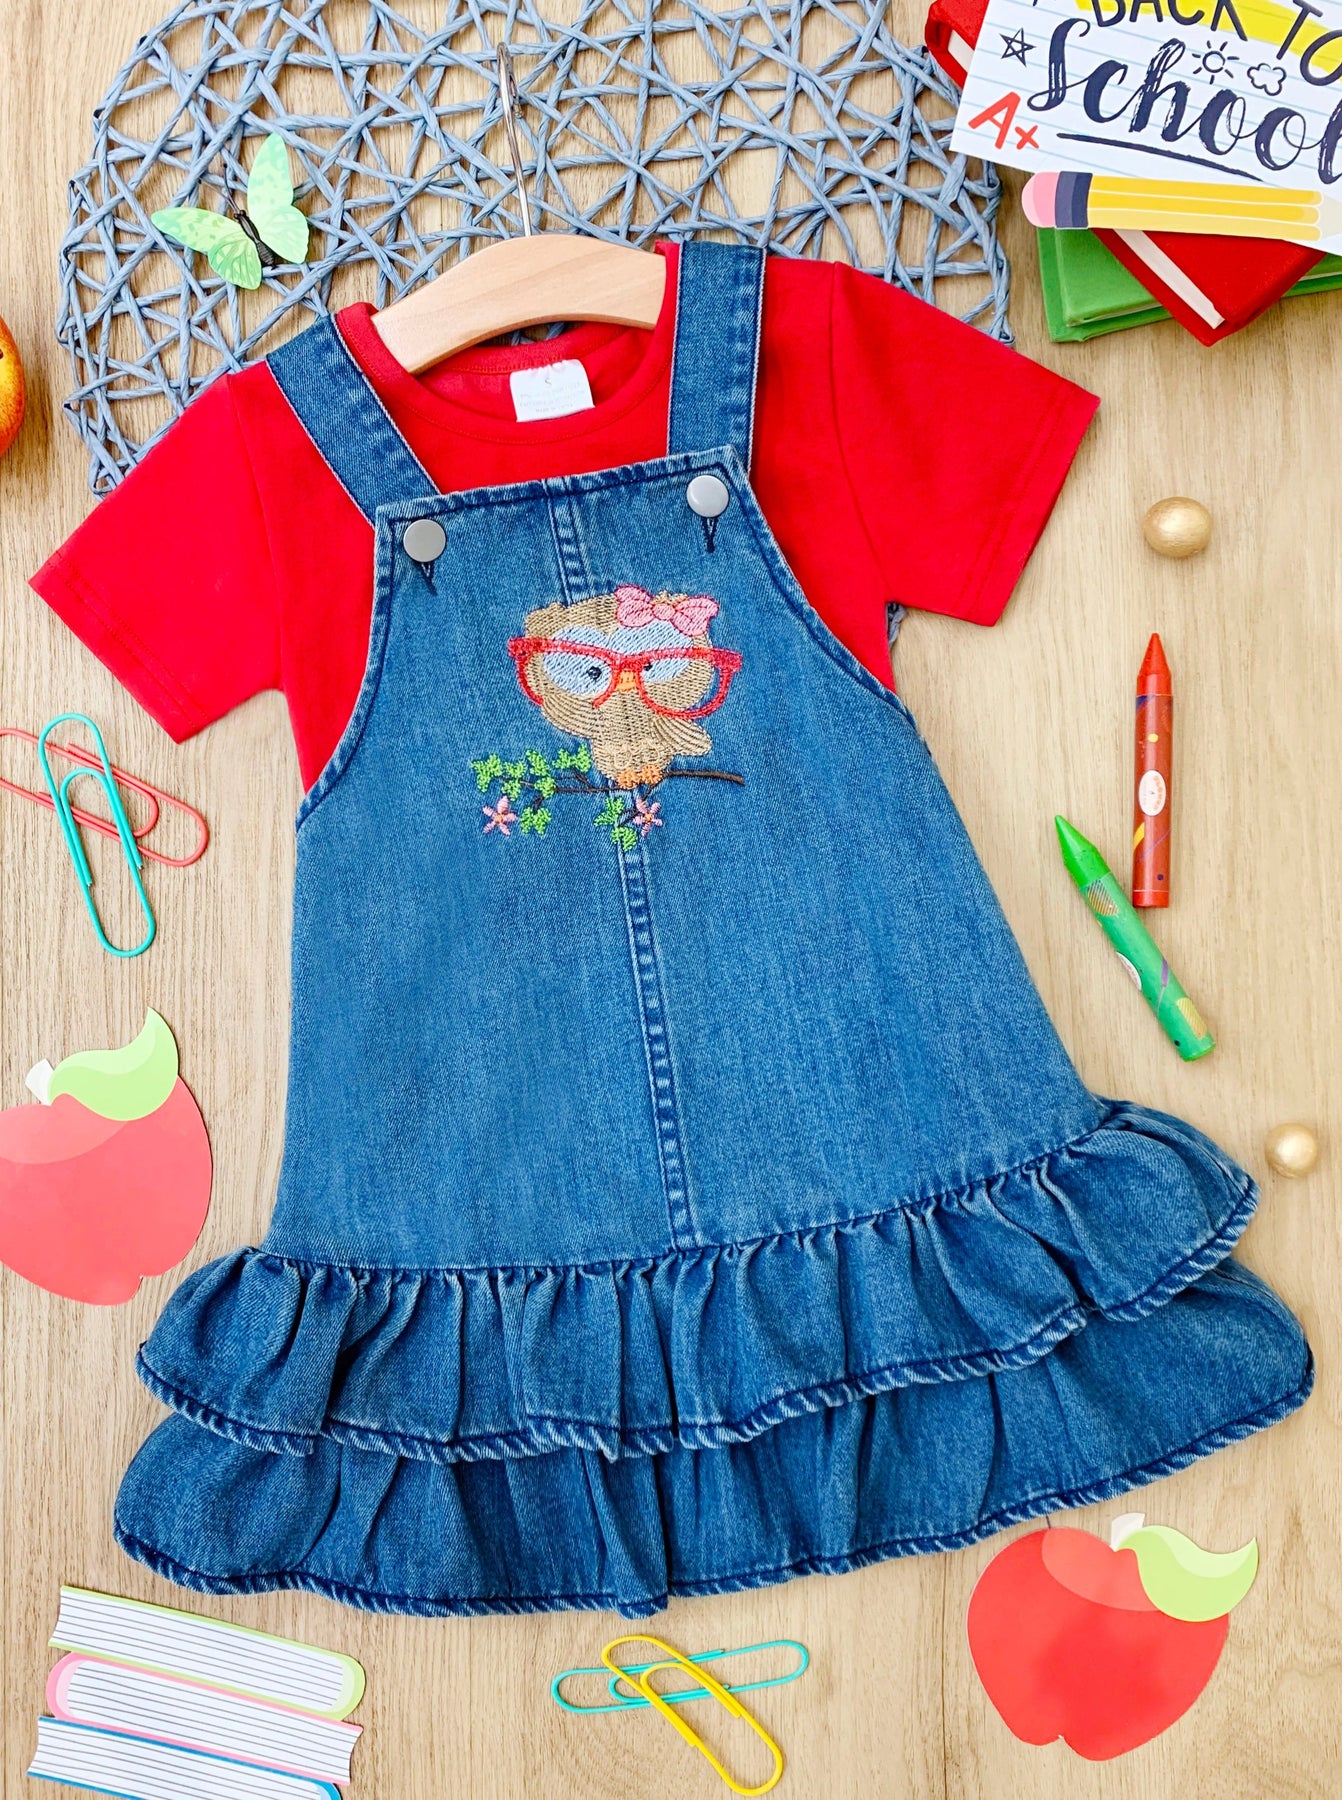 Women's Casual Can Look Sophisticated Too Denim Overalls - Mia Belle Girls